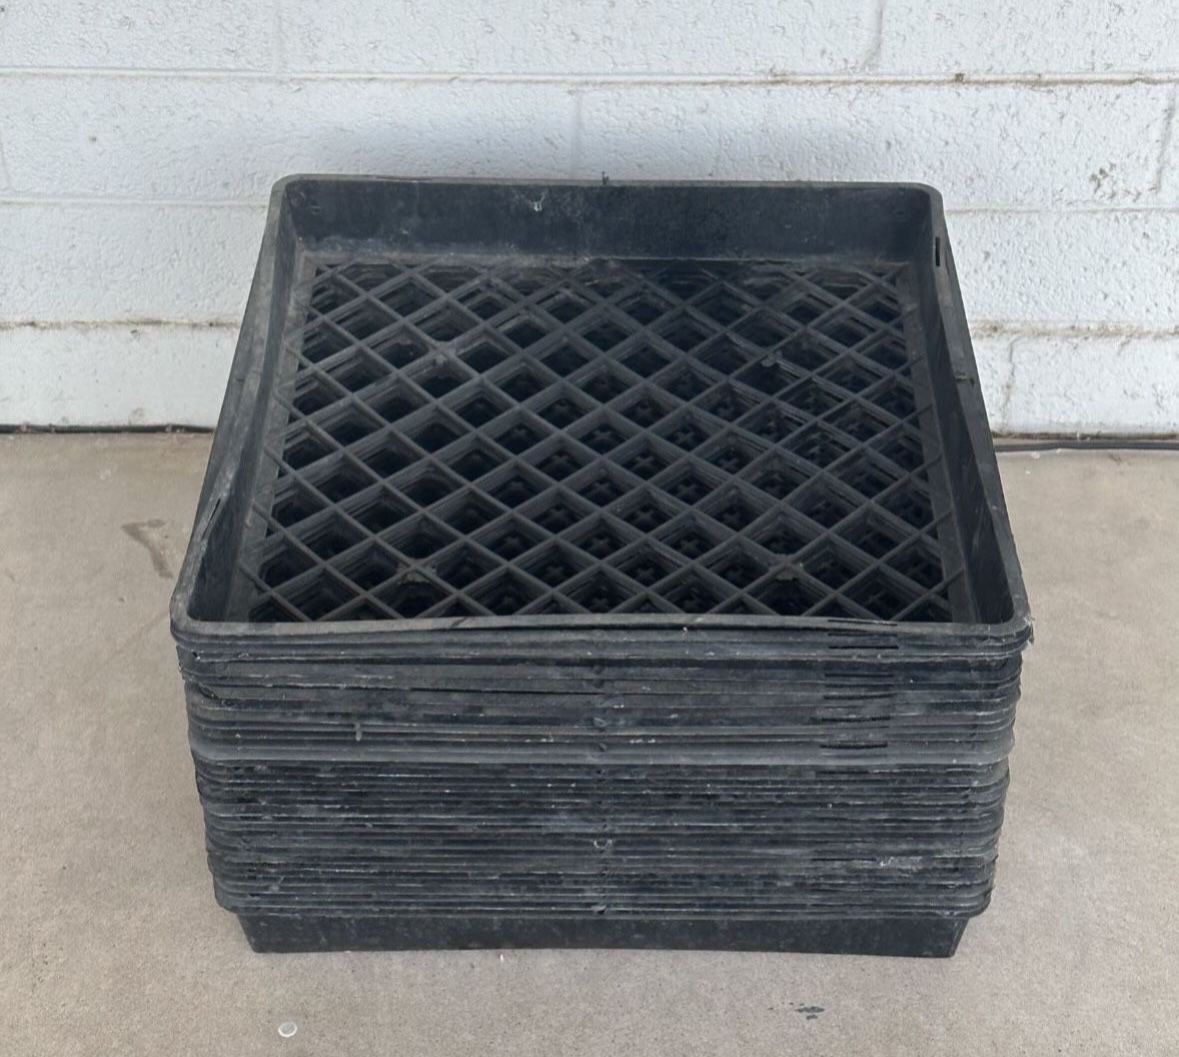 Square Plastic Crates Crate Carrying Carry On Tray For Small Flowers Vegetable Pots Planter Gardening Organization Organizer 